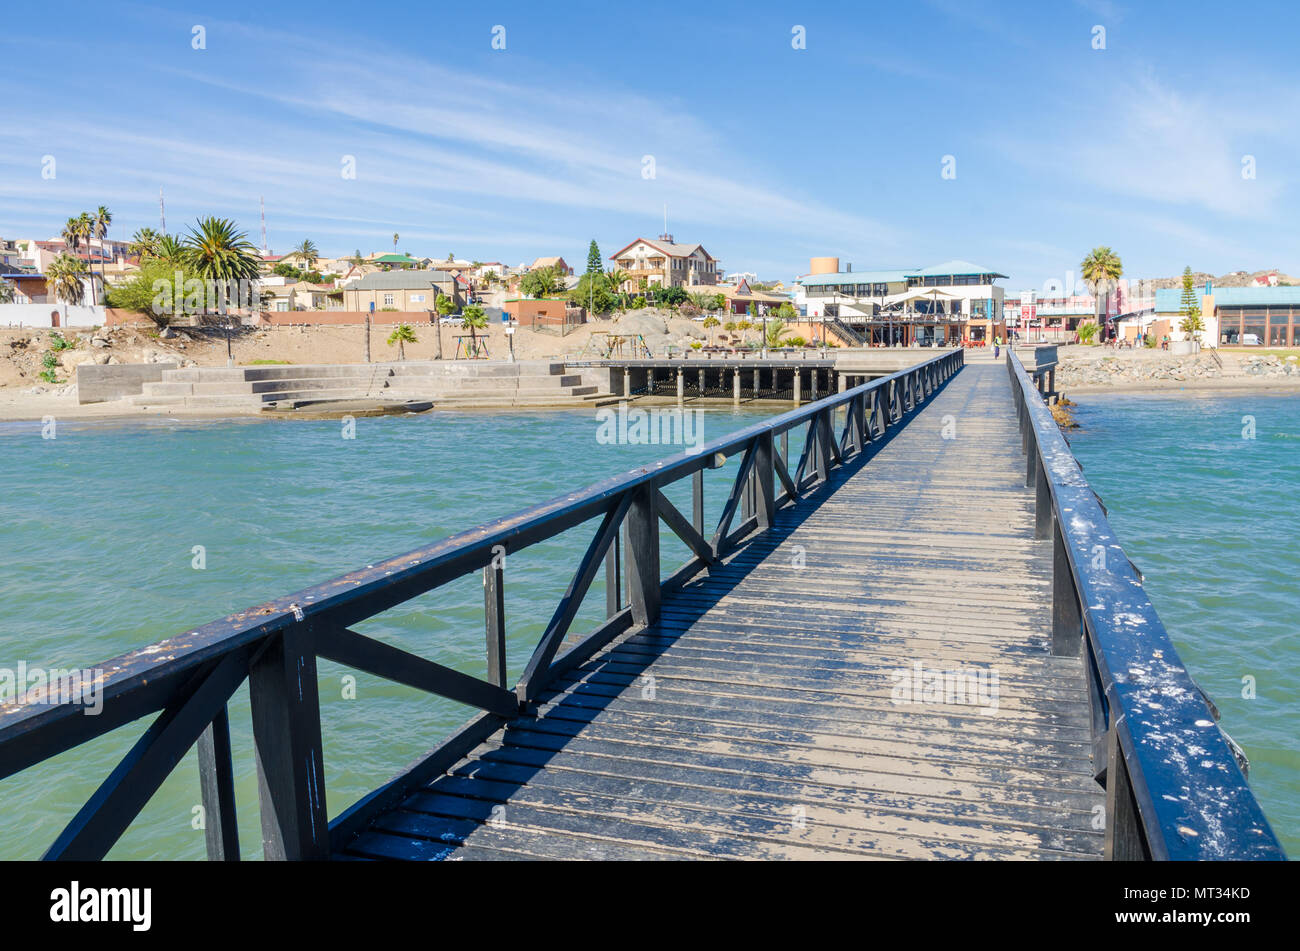 Luderitz, Namibia - July 08 2014: View over Luderitz from wooden jetty at sea on bright sunny day Stock Photo